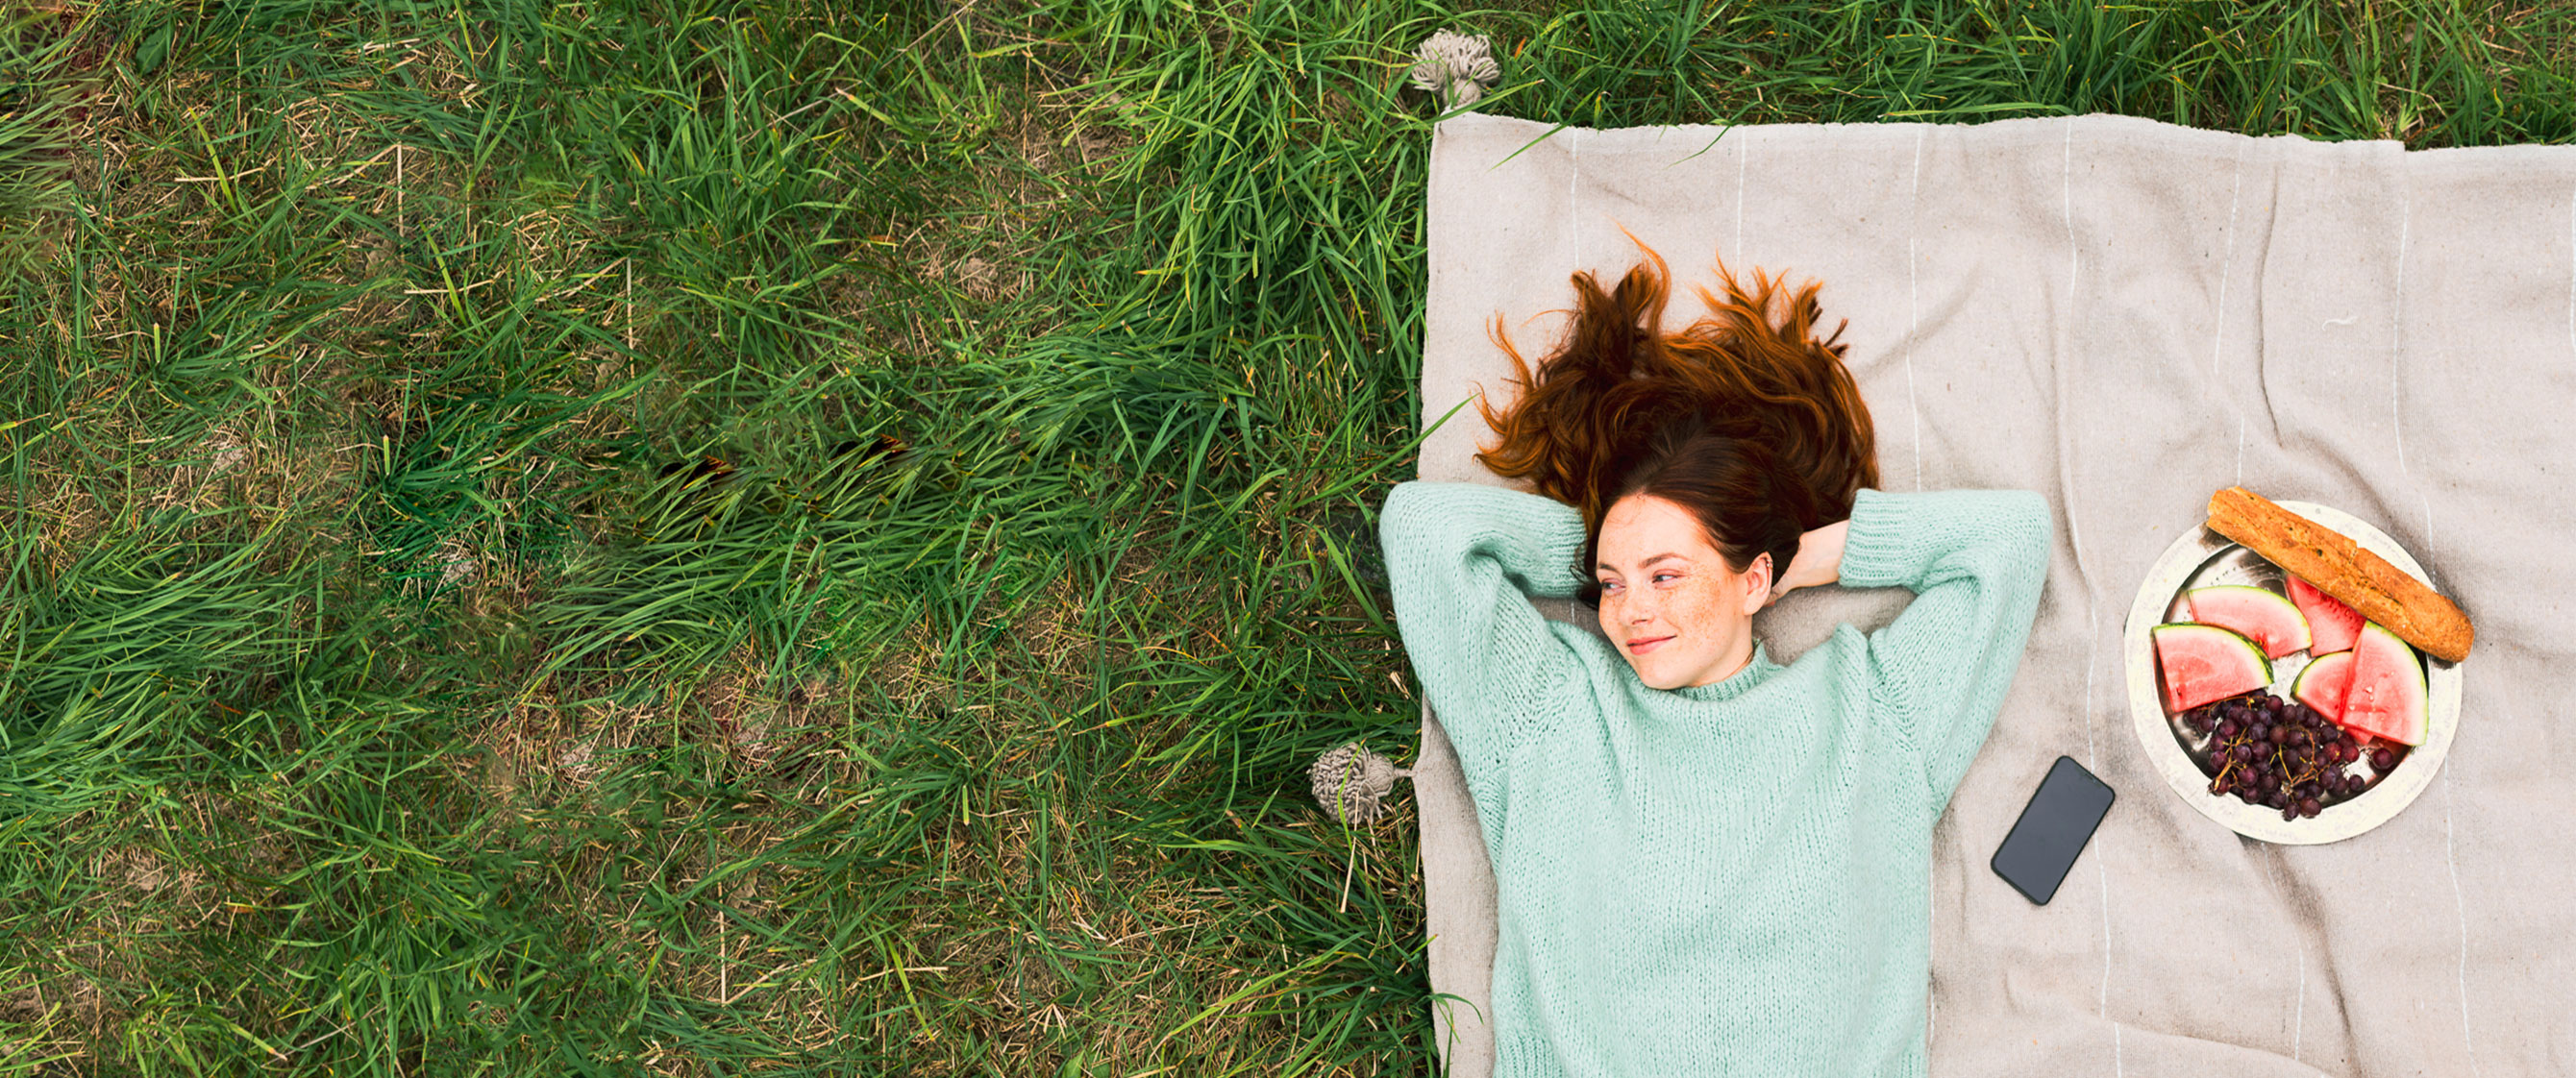 Girl in the park relaxing on a blanket which has been laid on the grass.